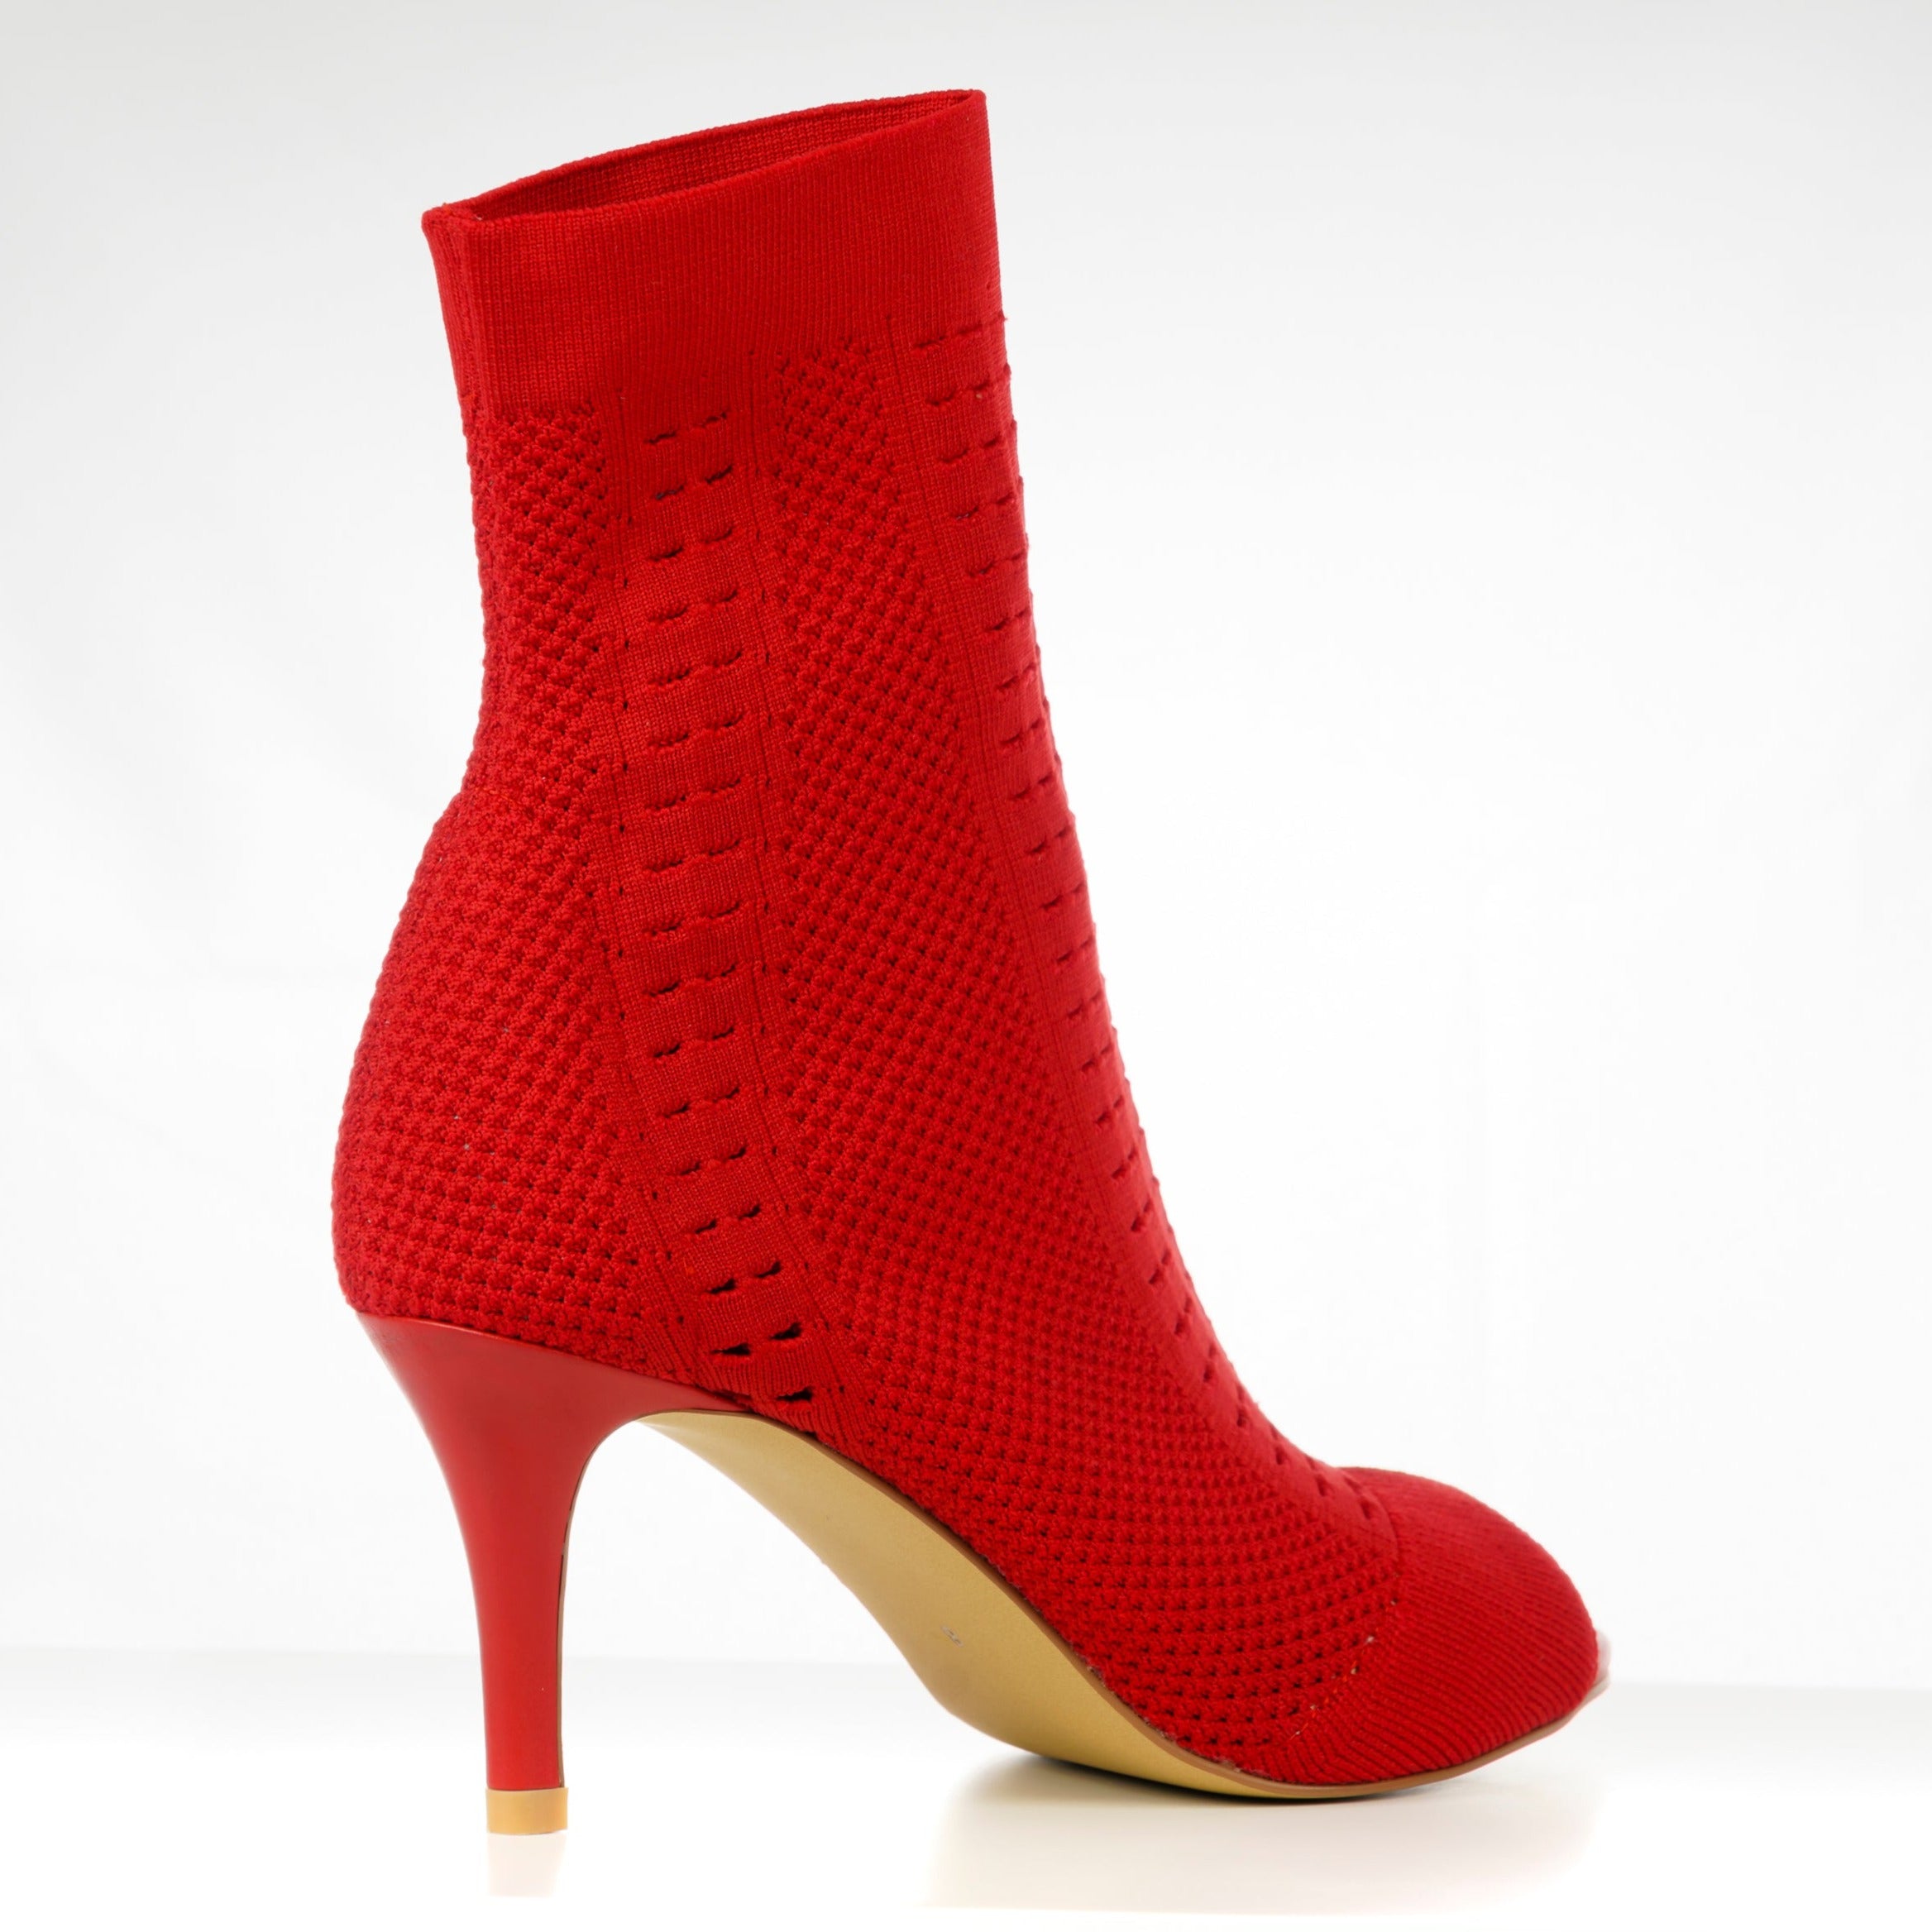 Red ankle high sock boot heels with open toe - back view